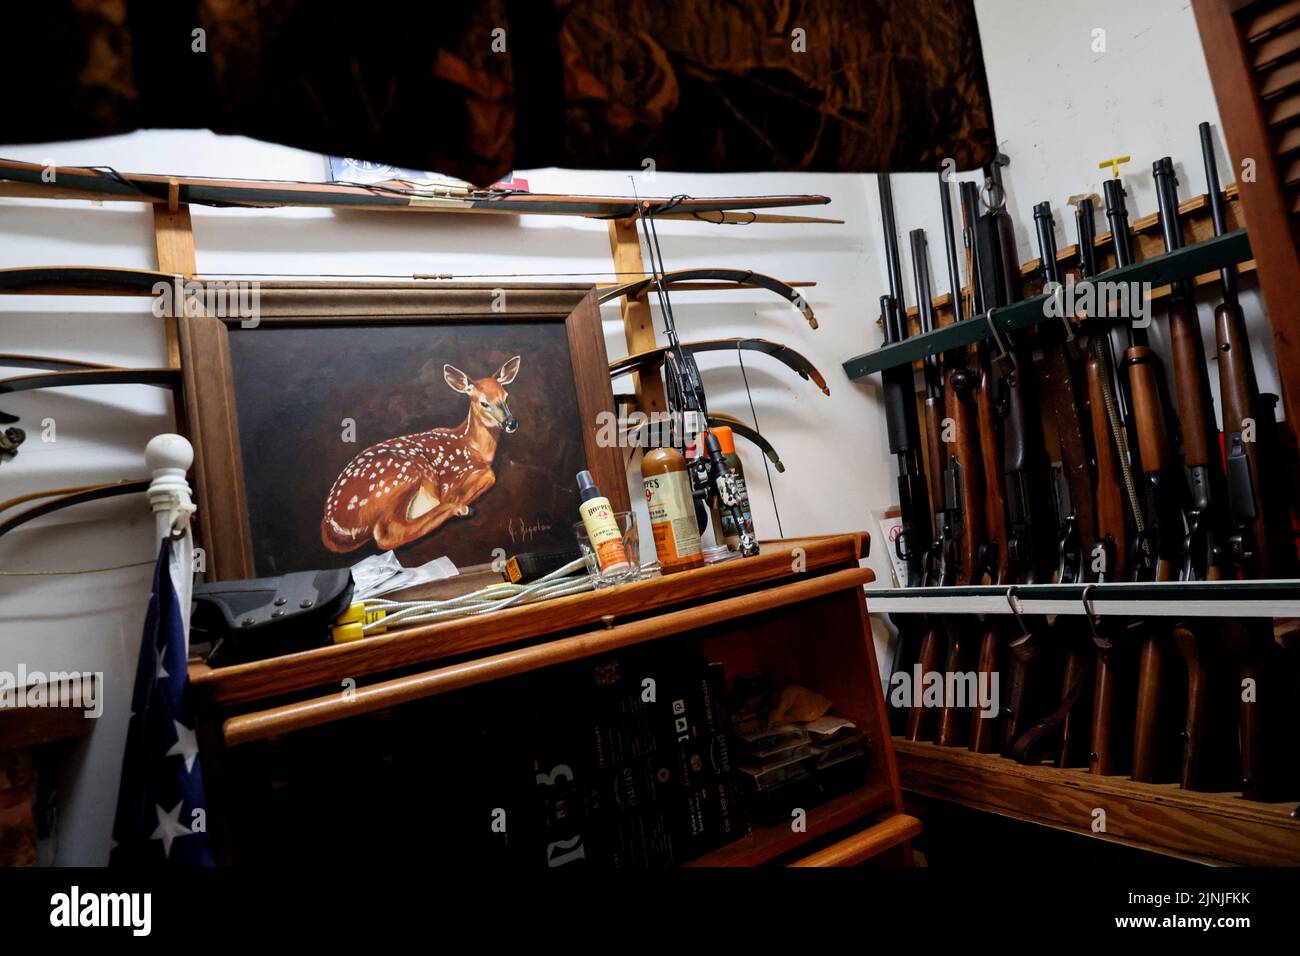 Rifles and bows stand in a gun rack inside a residents home in Corinth, New York, U.S., July 21, 2022. REUTERS/Shannon Stapleton Stock Photo